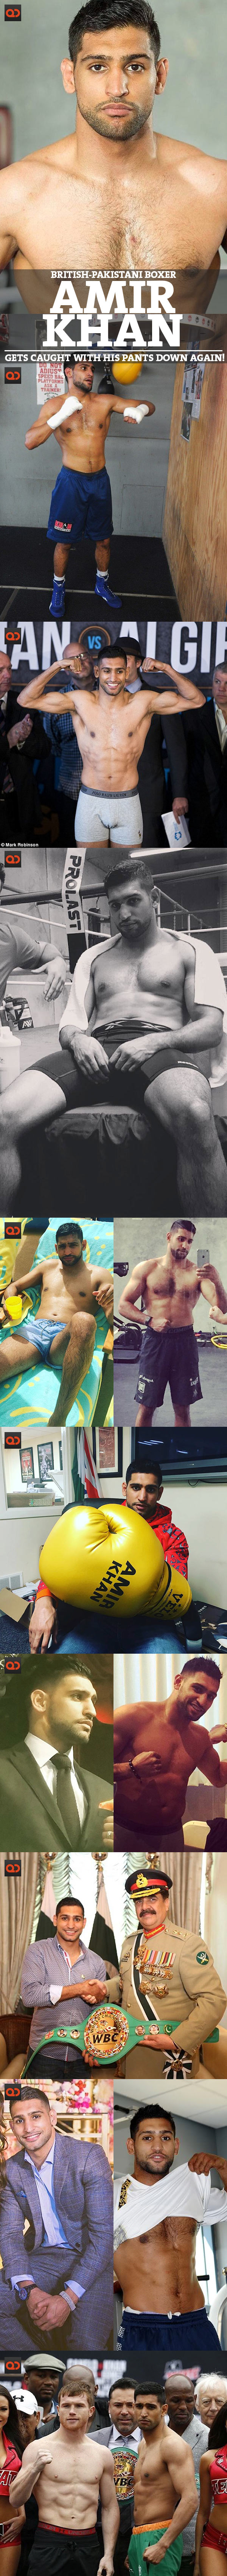 Amir Khan, British-Pakistani Boxer, Gets Caught With His Pants Down Again!